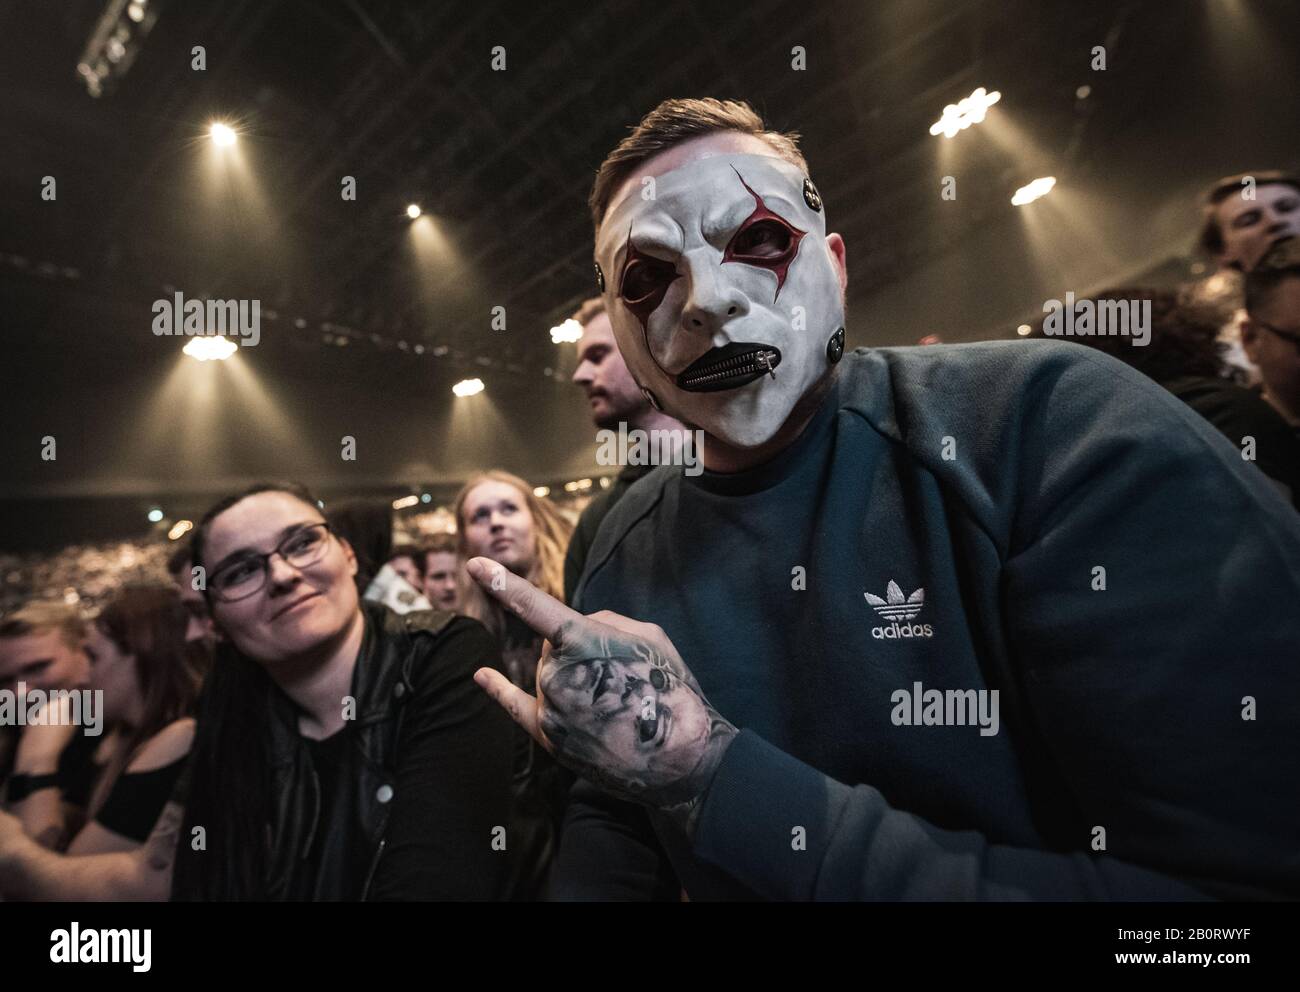 Copenhagen, Denmark. 20th Feb, 2020. Concert goers attend a live concert  with the American heavy metal